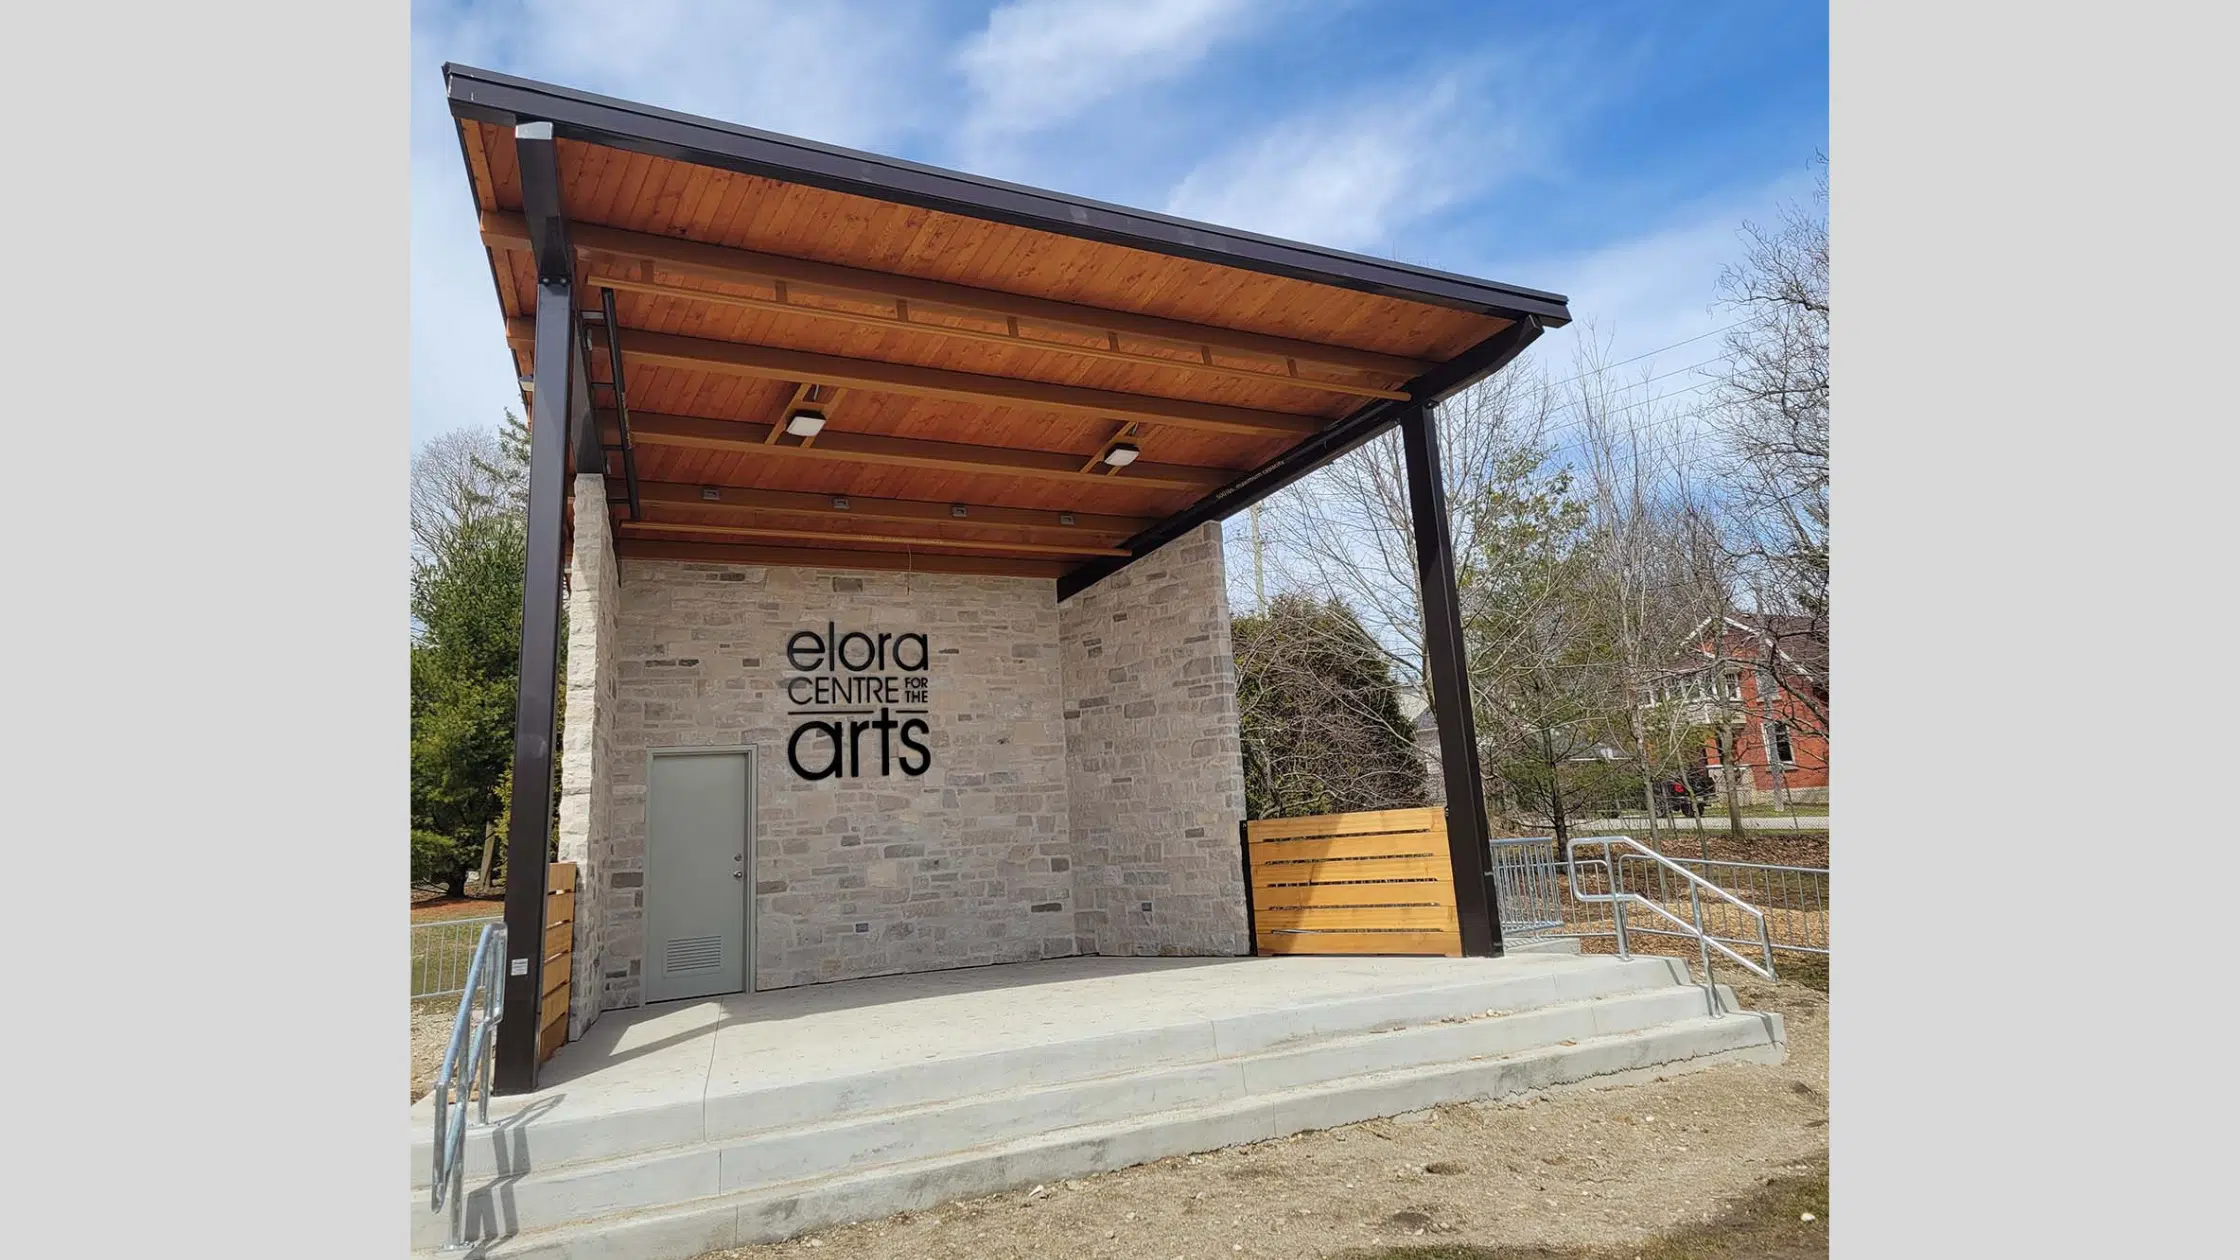 New Performance Pavilion at the Elora Centre for the Arts Set to Open this Summer